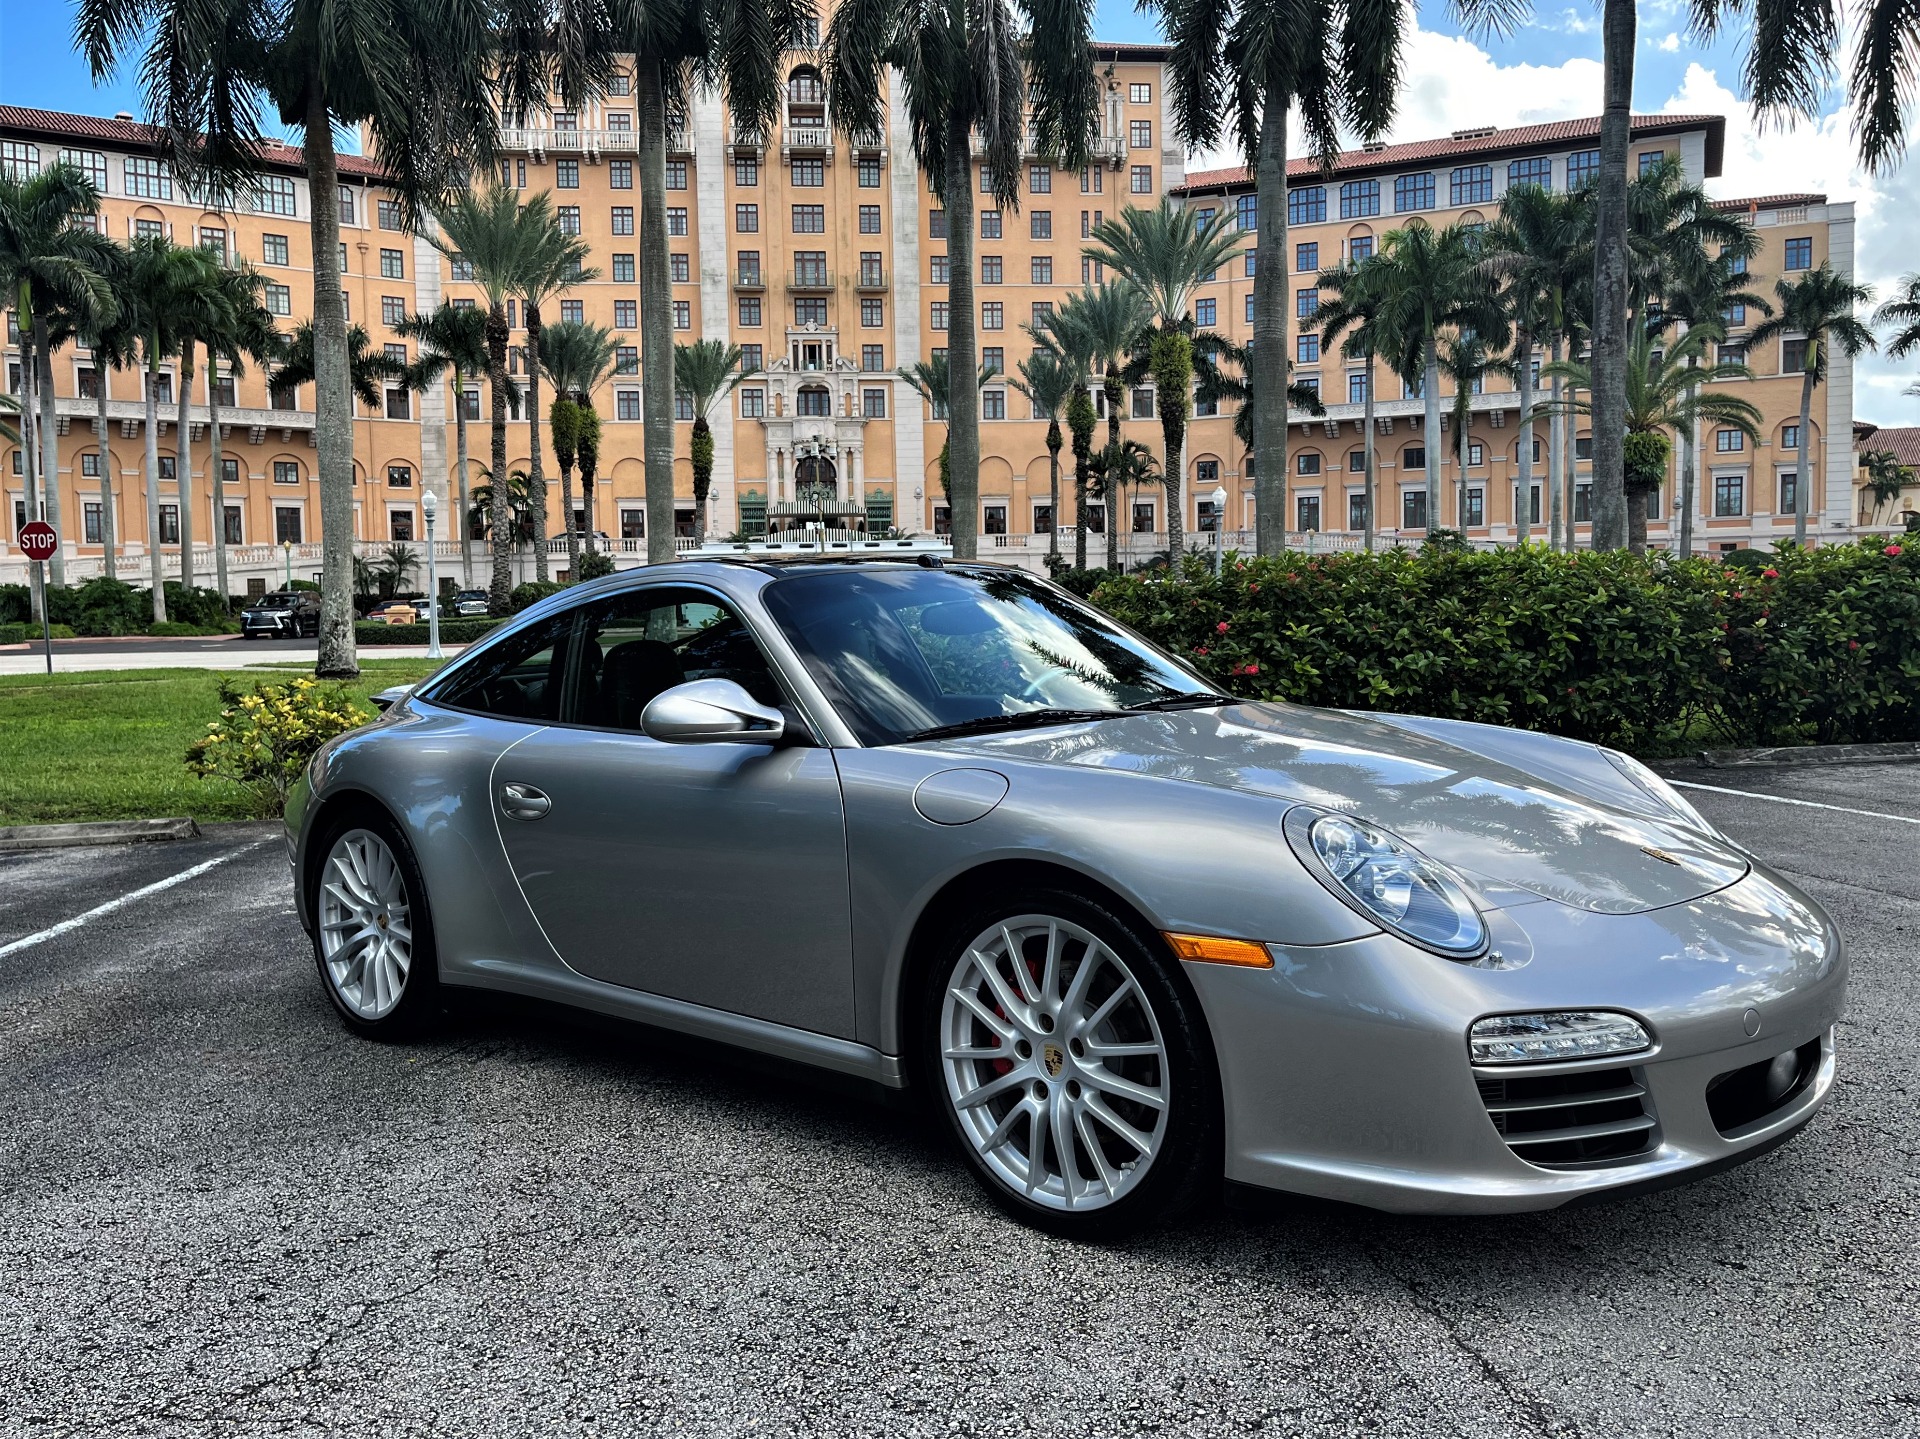 Used 2011 Porsche 911 Targa 4S for sale $85,850 at The Gables Sports Cars in Miami FL 33146 4